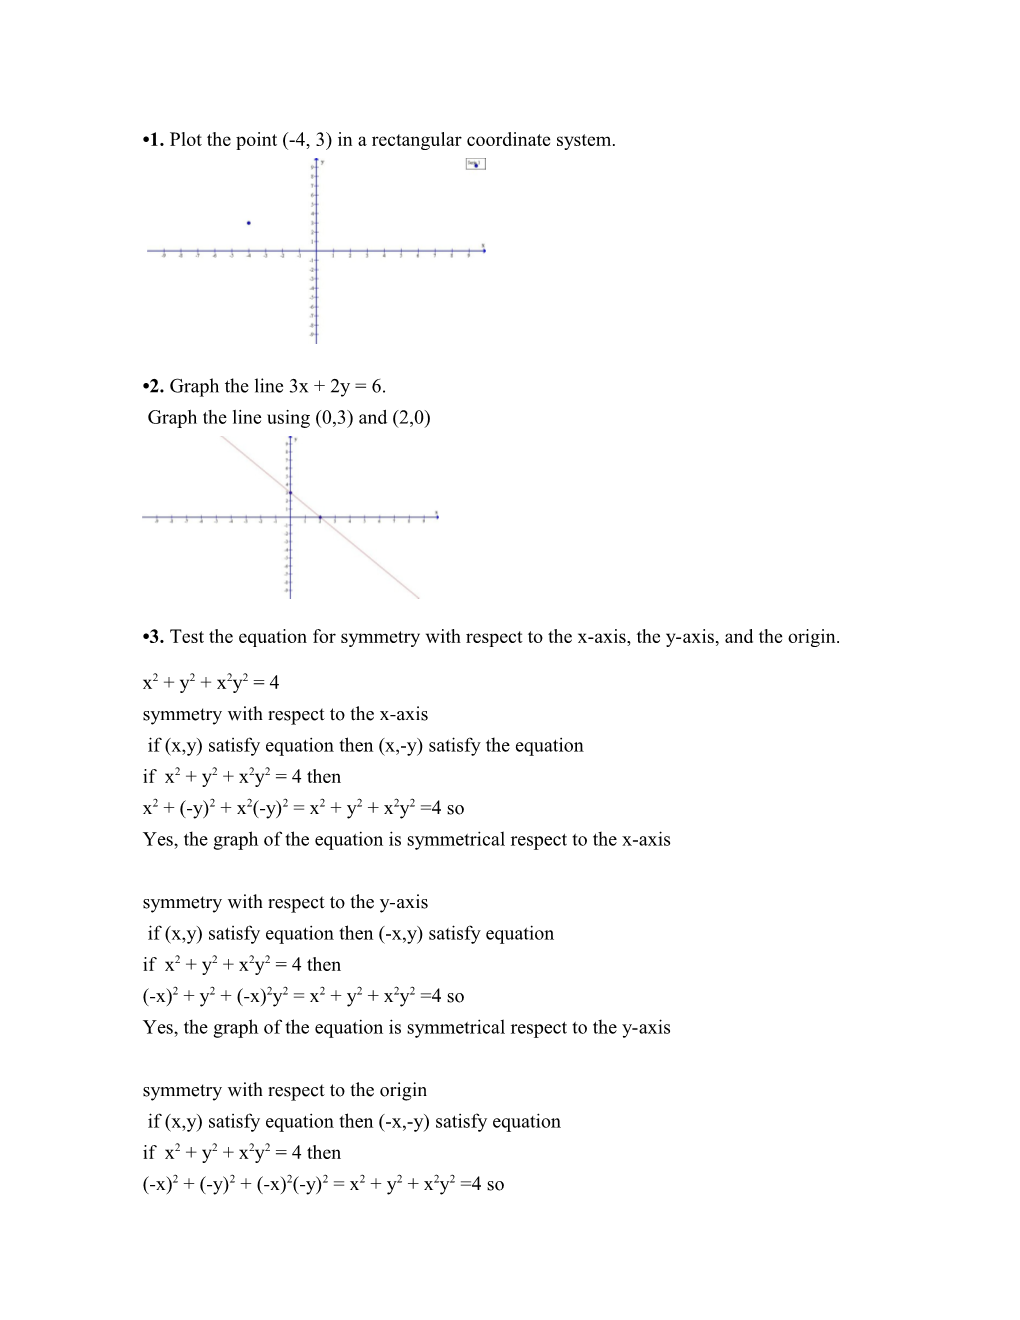 1. Plot the Point (-4, 3) in a Rectangular Coordinate System